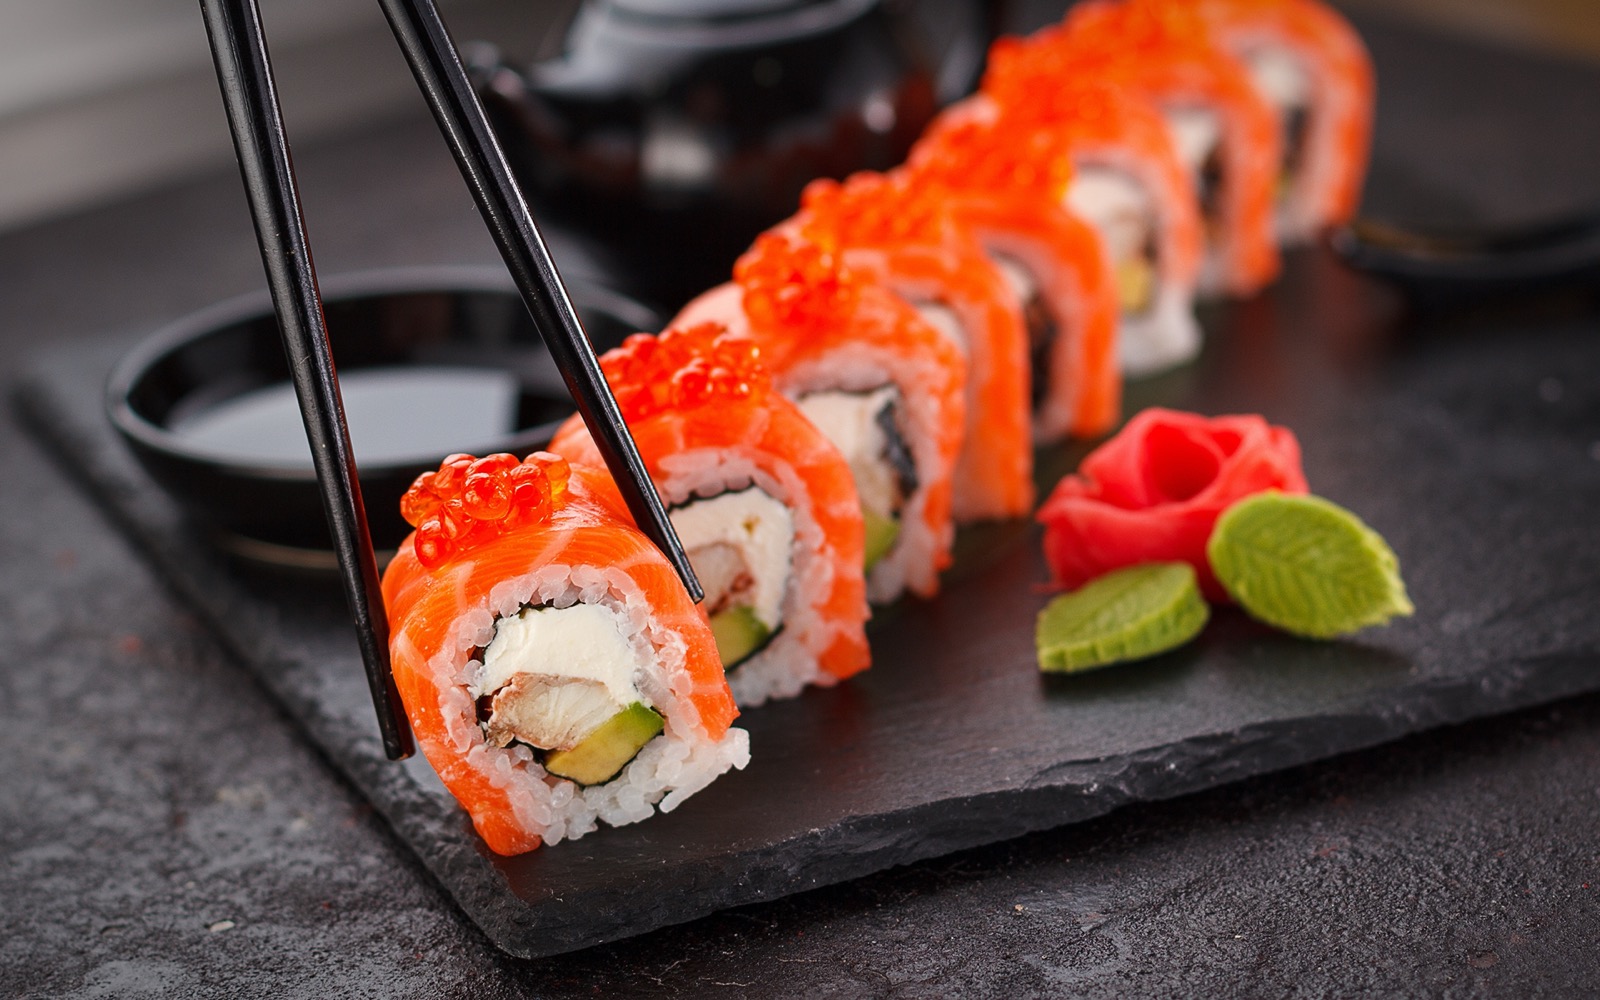 If You’ll Eat at Least 16 of These “Acquired Taste” Foods, You’re an Adventurous Eater Sushi